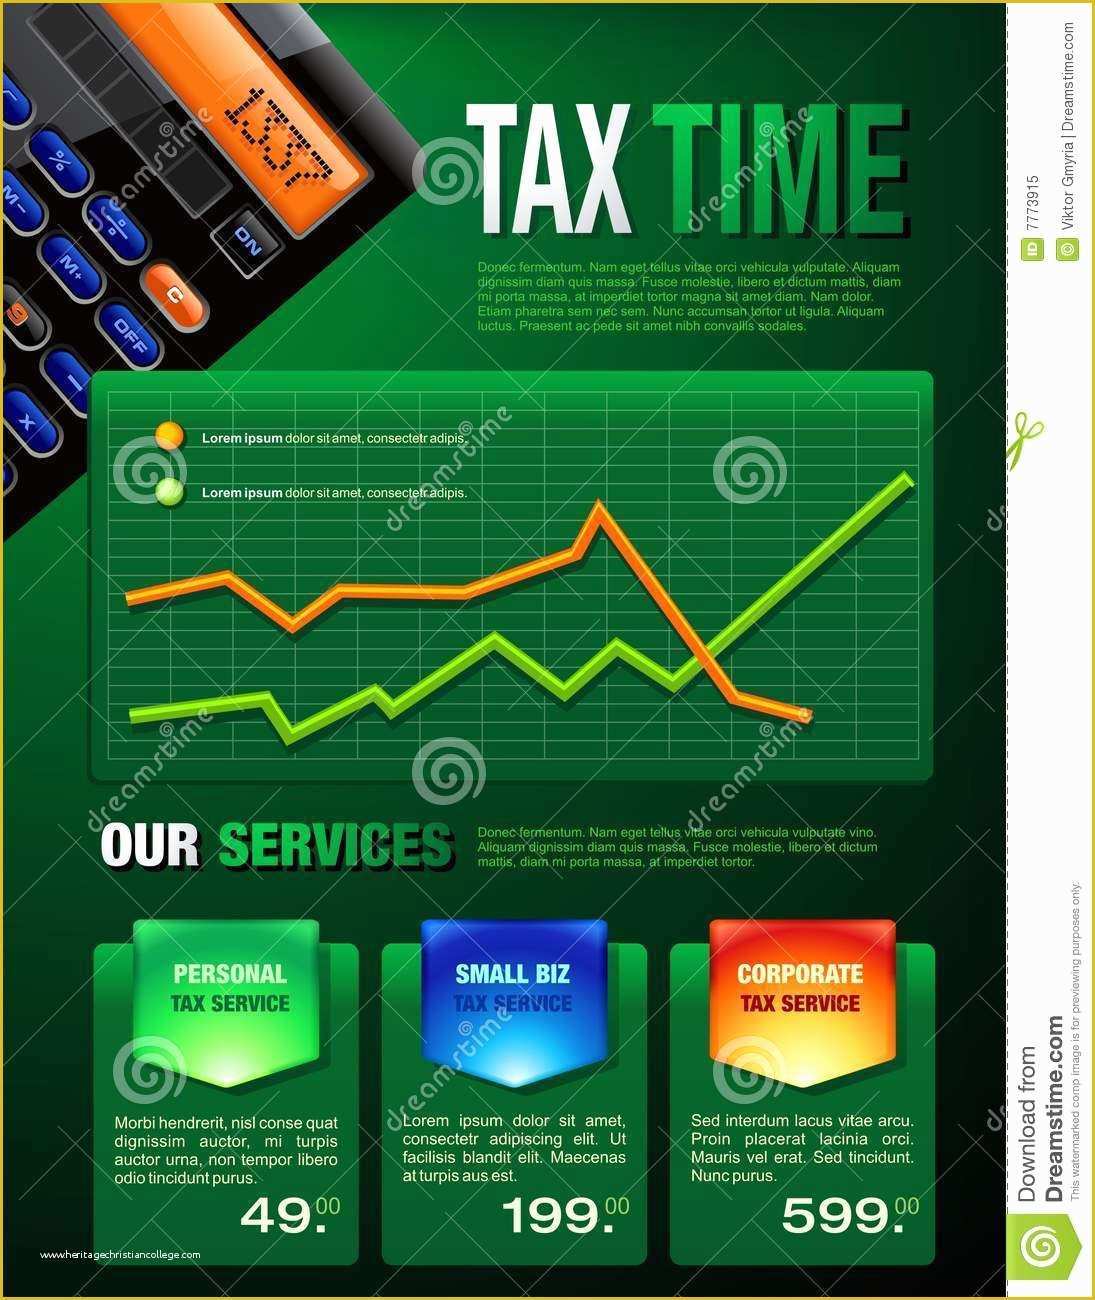 Free Tax Preparation Flyers Templates Of Tax Services Brochure Stock Vector Image Of forecasting